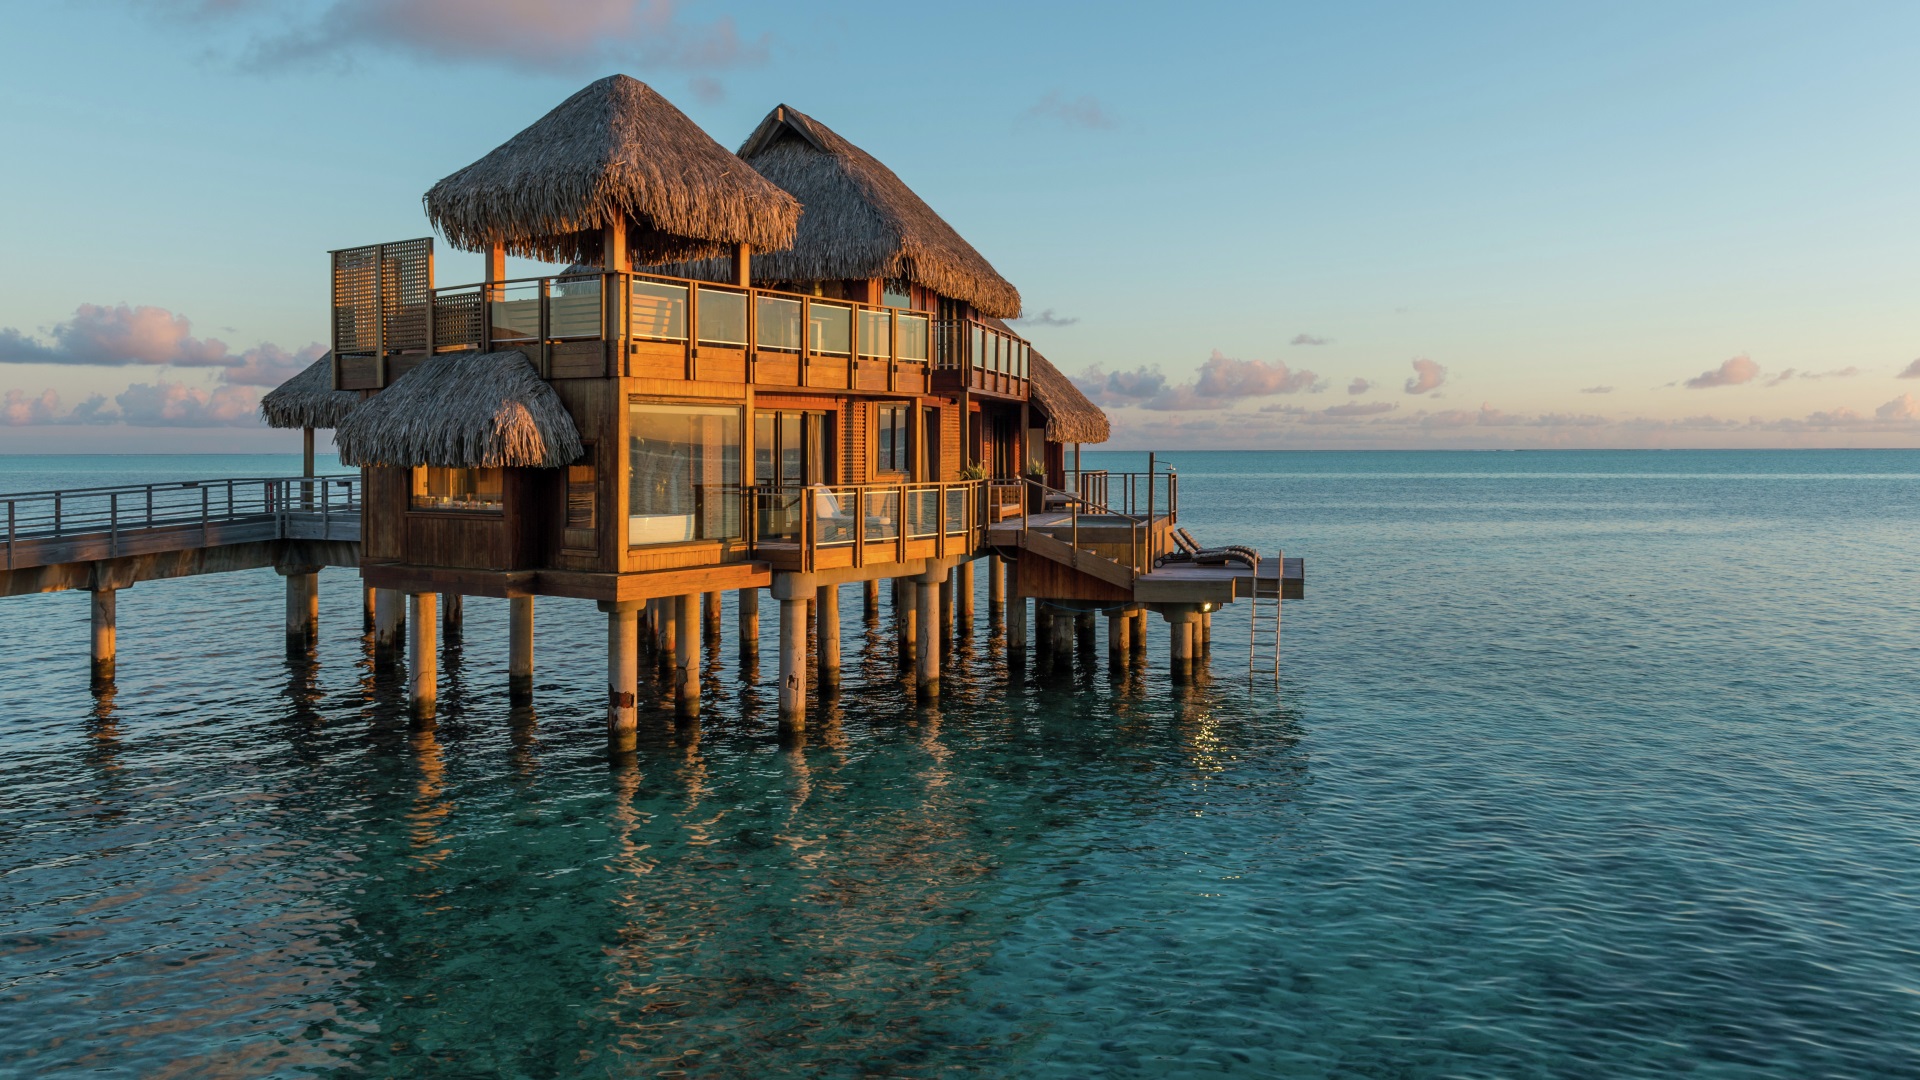 Experience tropical luxury in the heart of the South Pacific at Conrad Bora Bora Nui